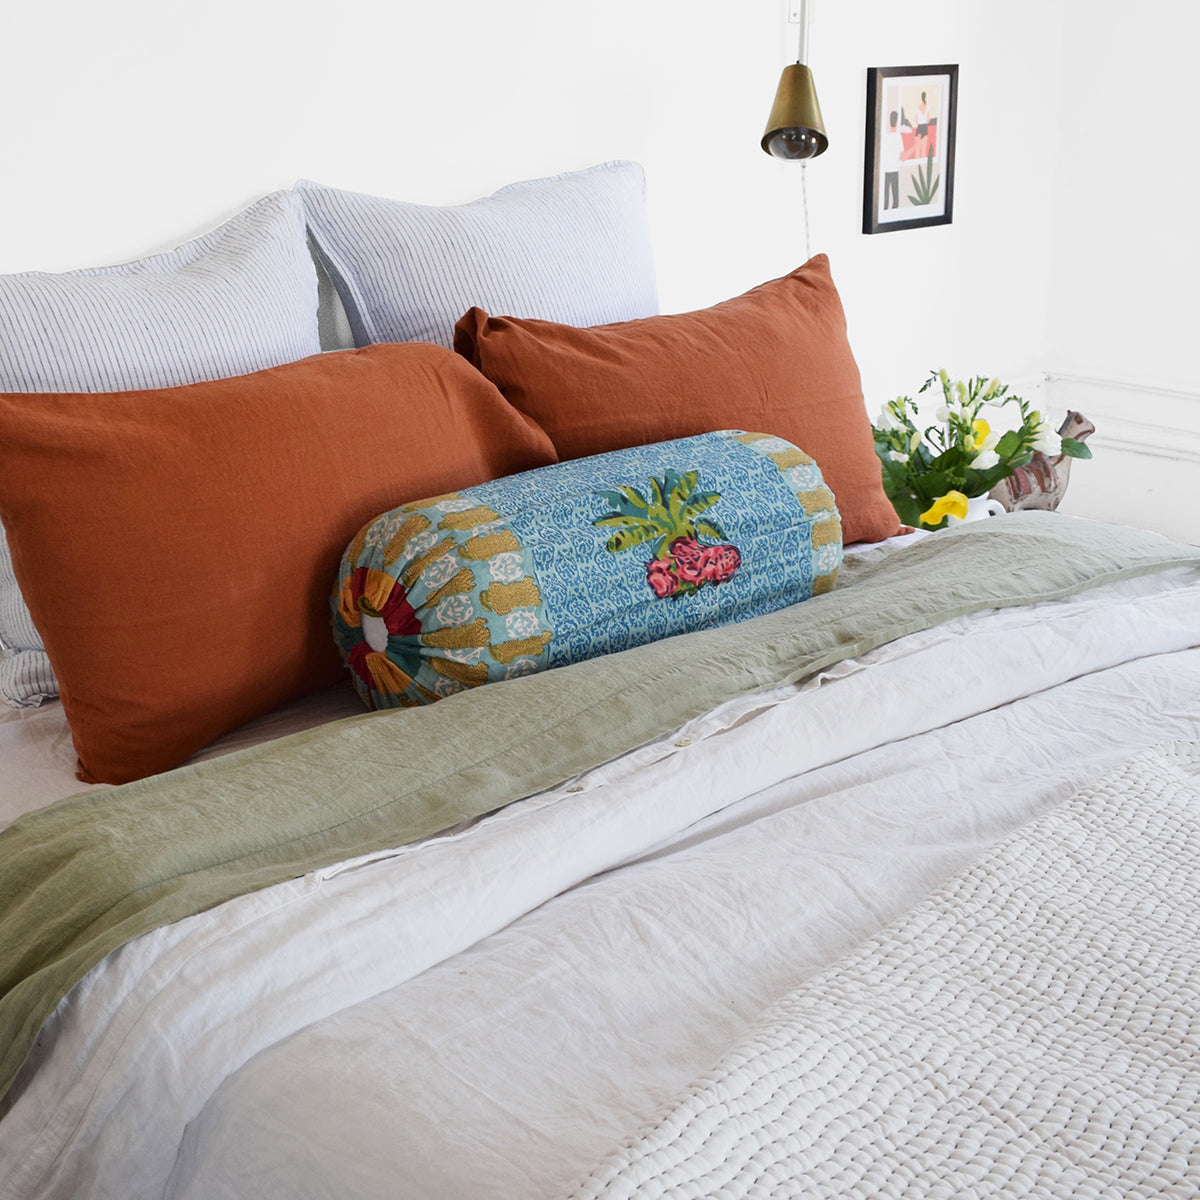 Linge Particulier Sienna Orange Standard Linen Pillowcase Sham with Lisa Corti bolster pillow and blue stripe euro shams for a colorful linen bedding look in burnt orange - Collyer&#39;s Mansion